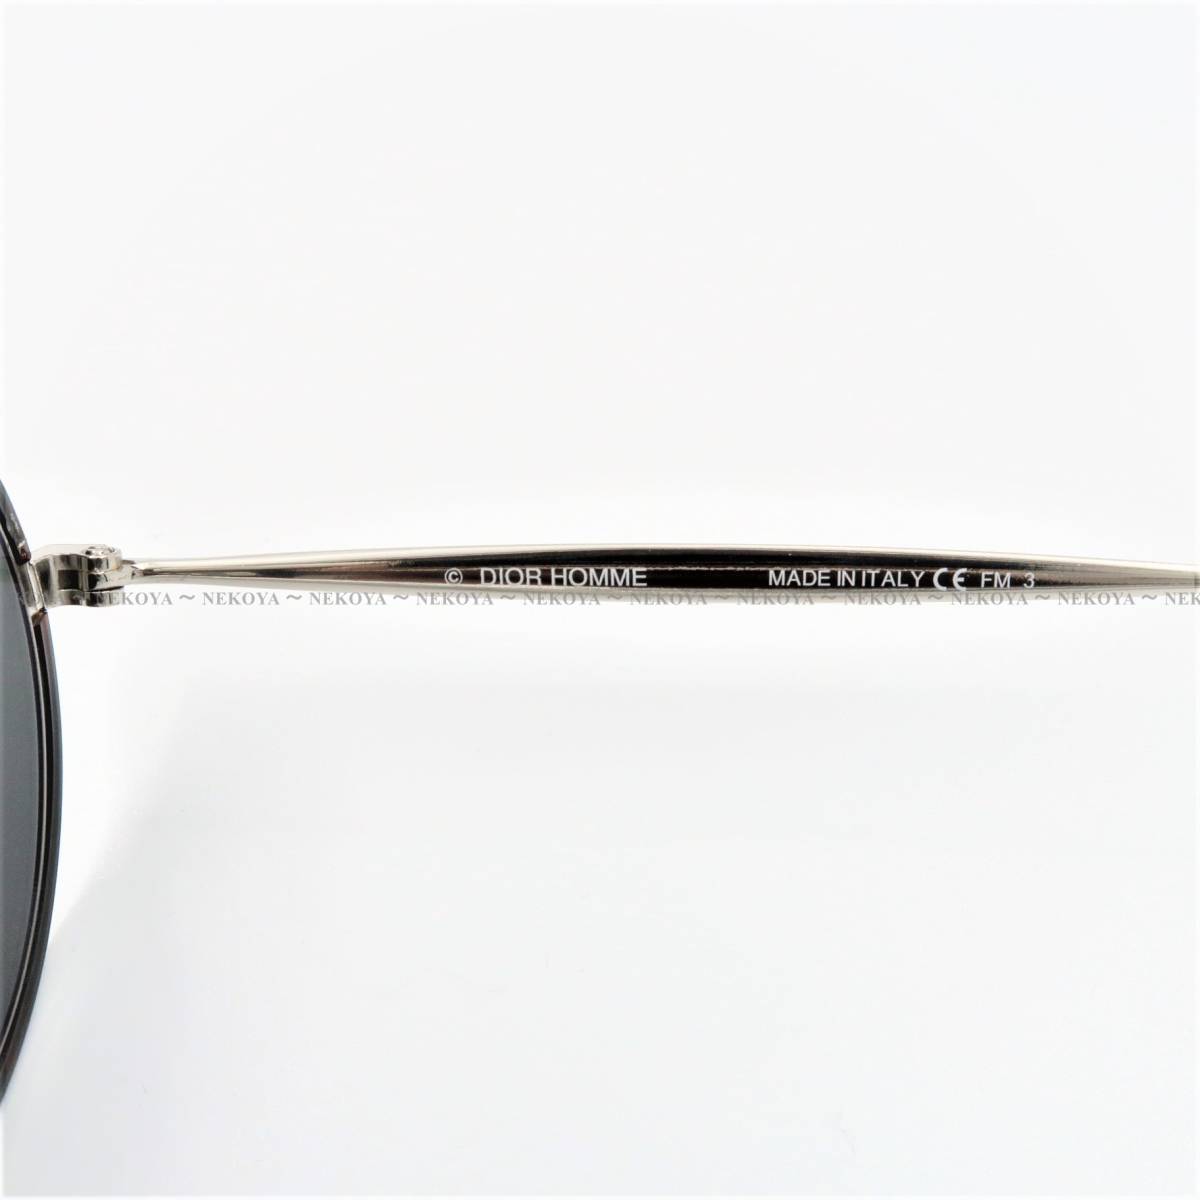 DIOR HOMME DIORSYNTHESIS sunglasses Habana . slope wide . Dior Homme 